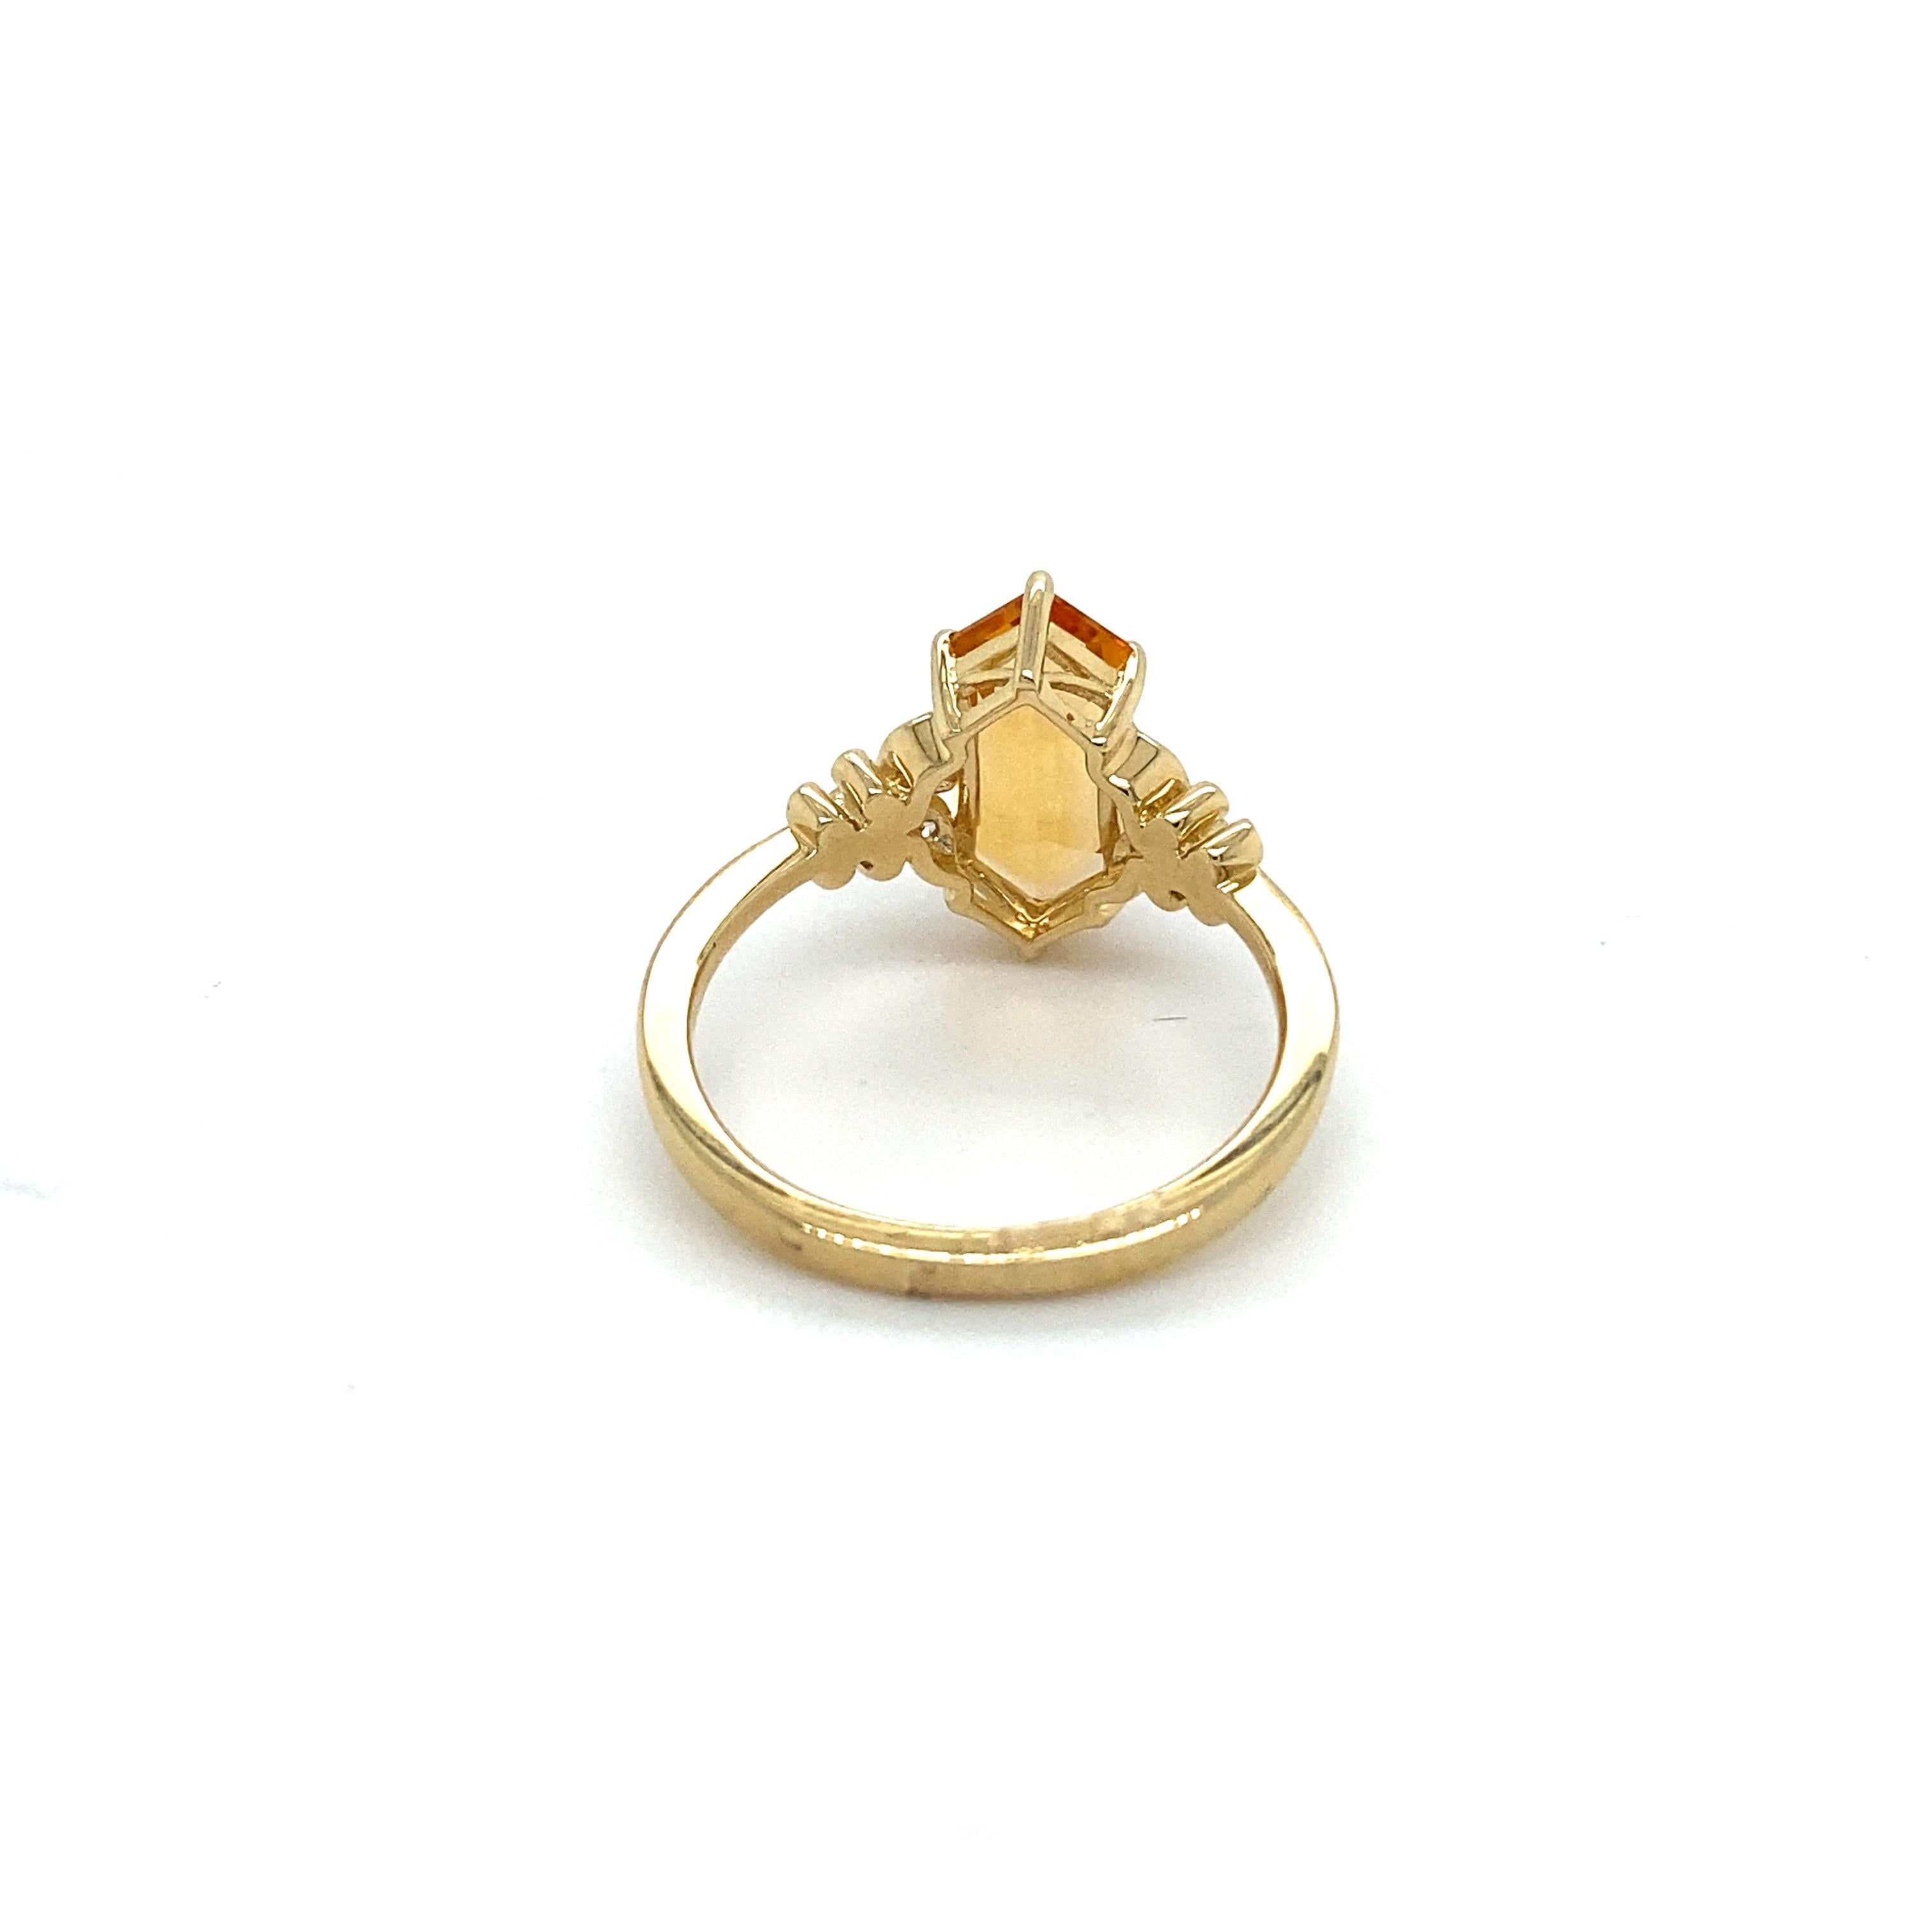 For Sale:  Hexagonal Citrine Ring with Diamonds and 6 Sides 2.15 Carat Total Weight 3